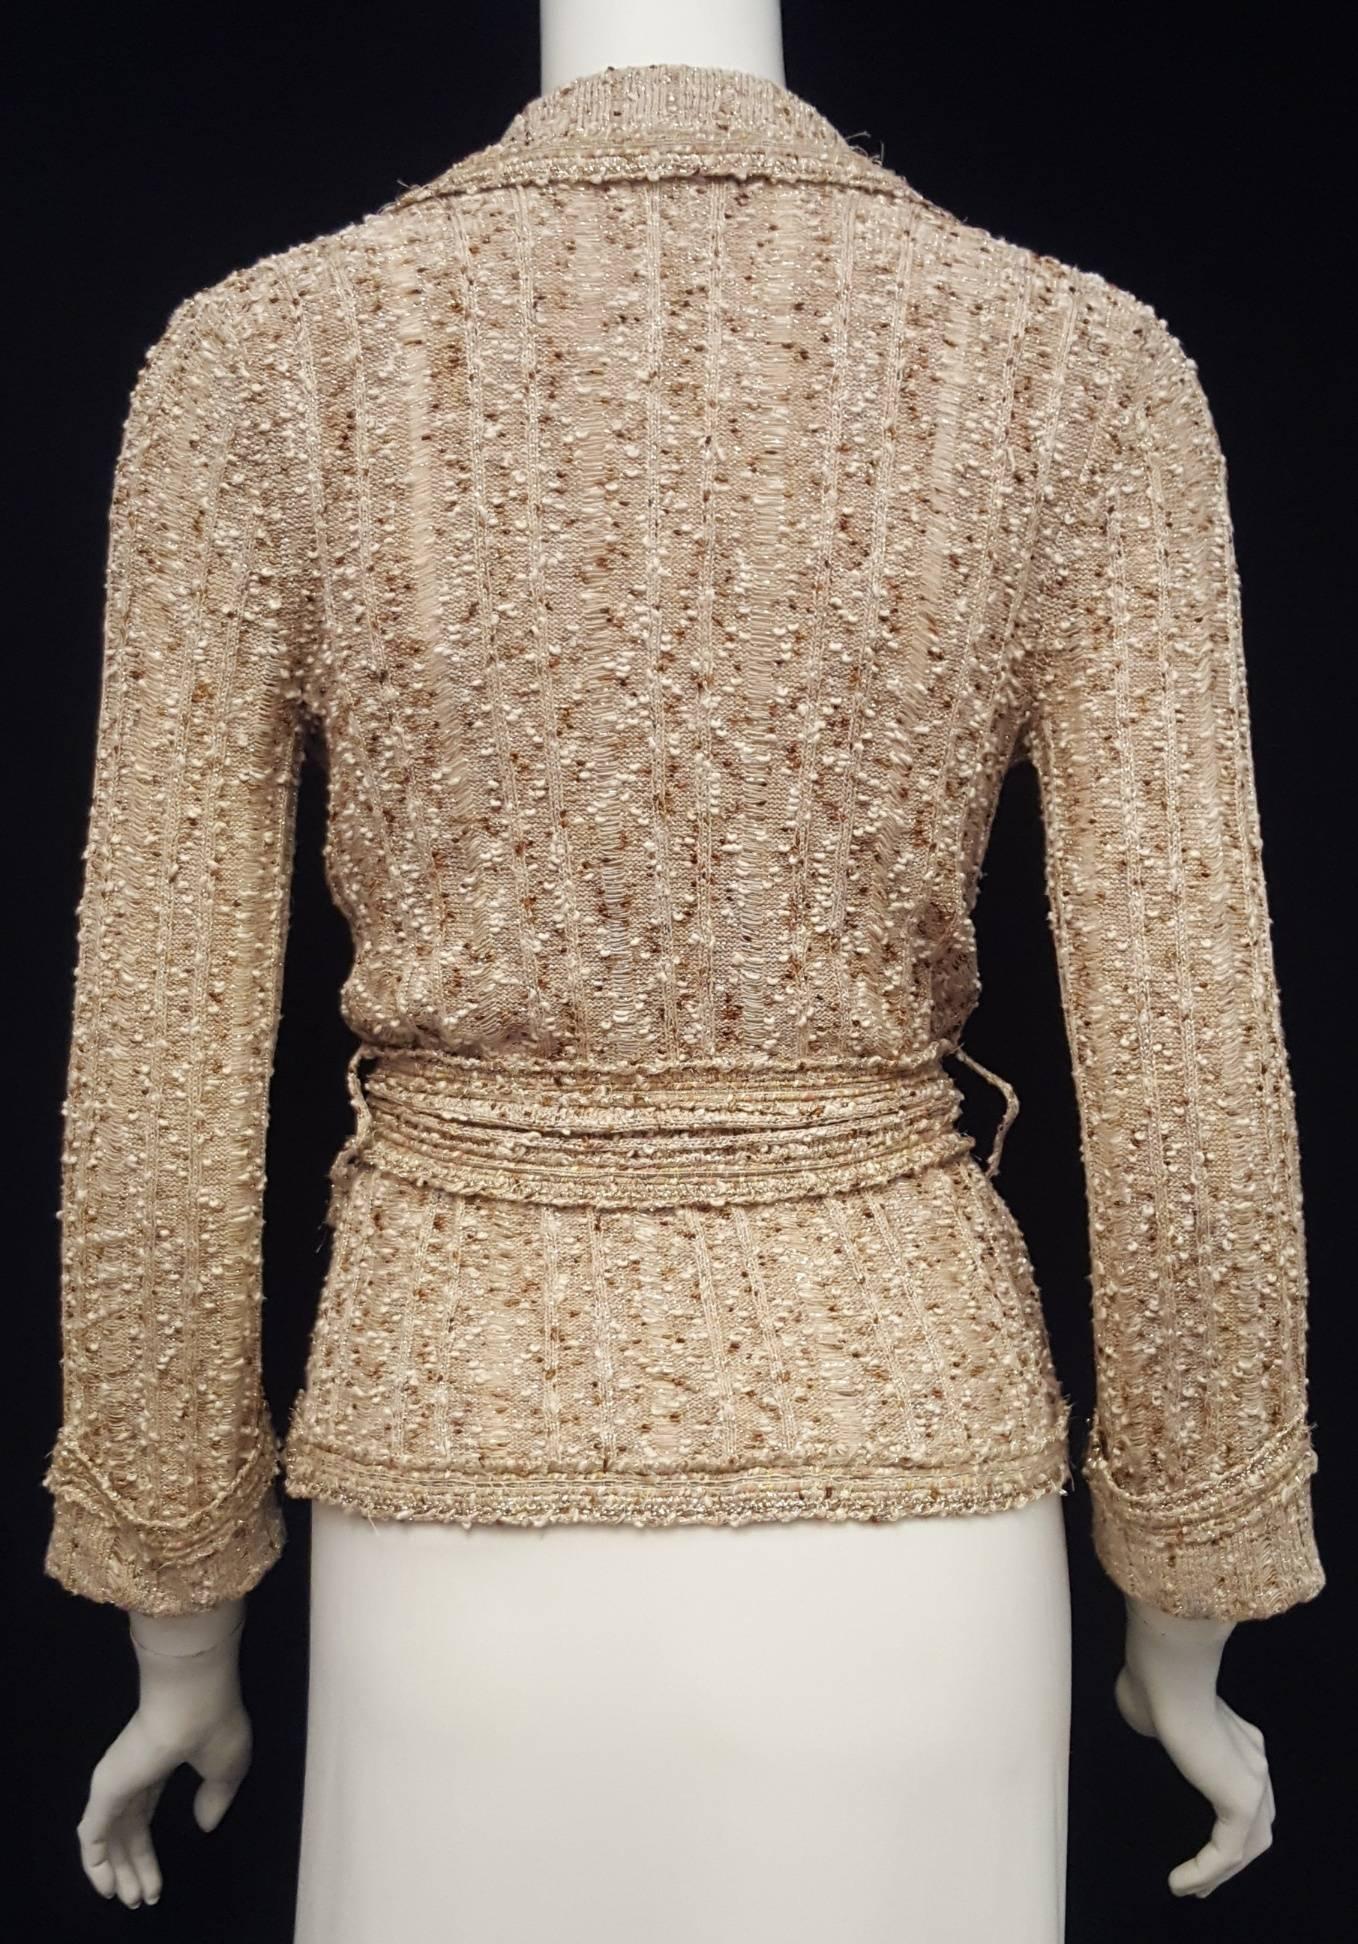 Chanel Beige, Copper & Gold Tone Cotton Blend Knit Sweater Jacket from Spring 06 1